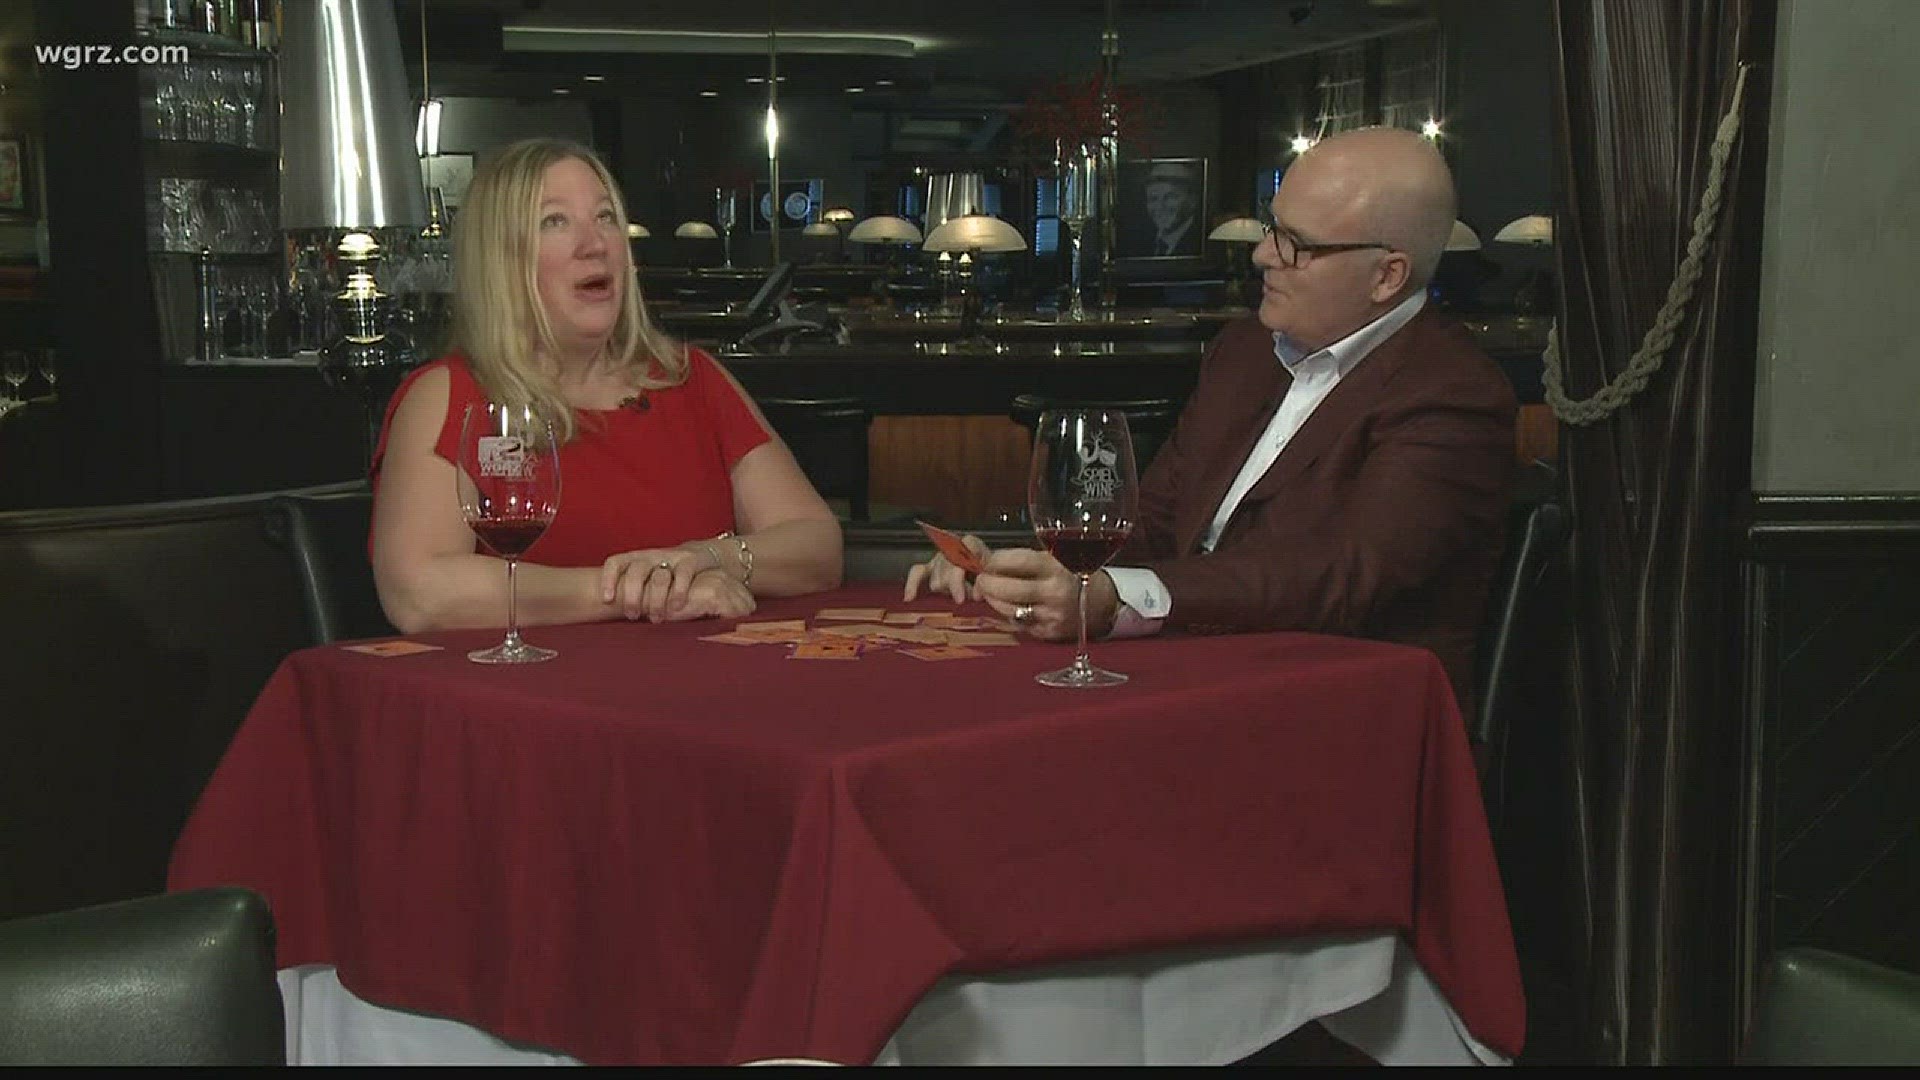 Kevin enjoys a glass of wine and plays a flash card game with Donna Schlosser-Long.